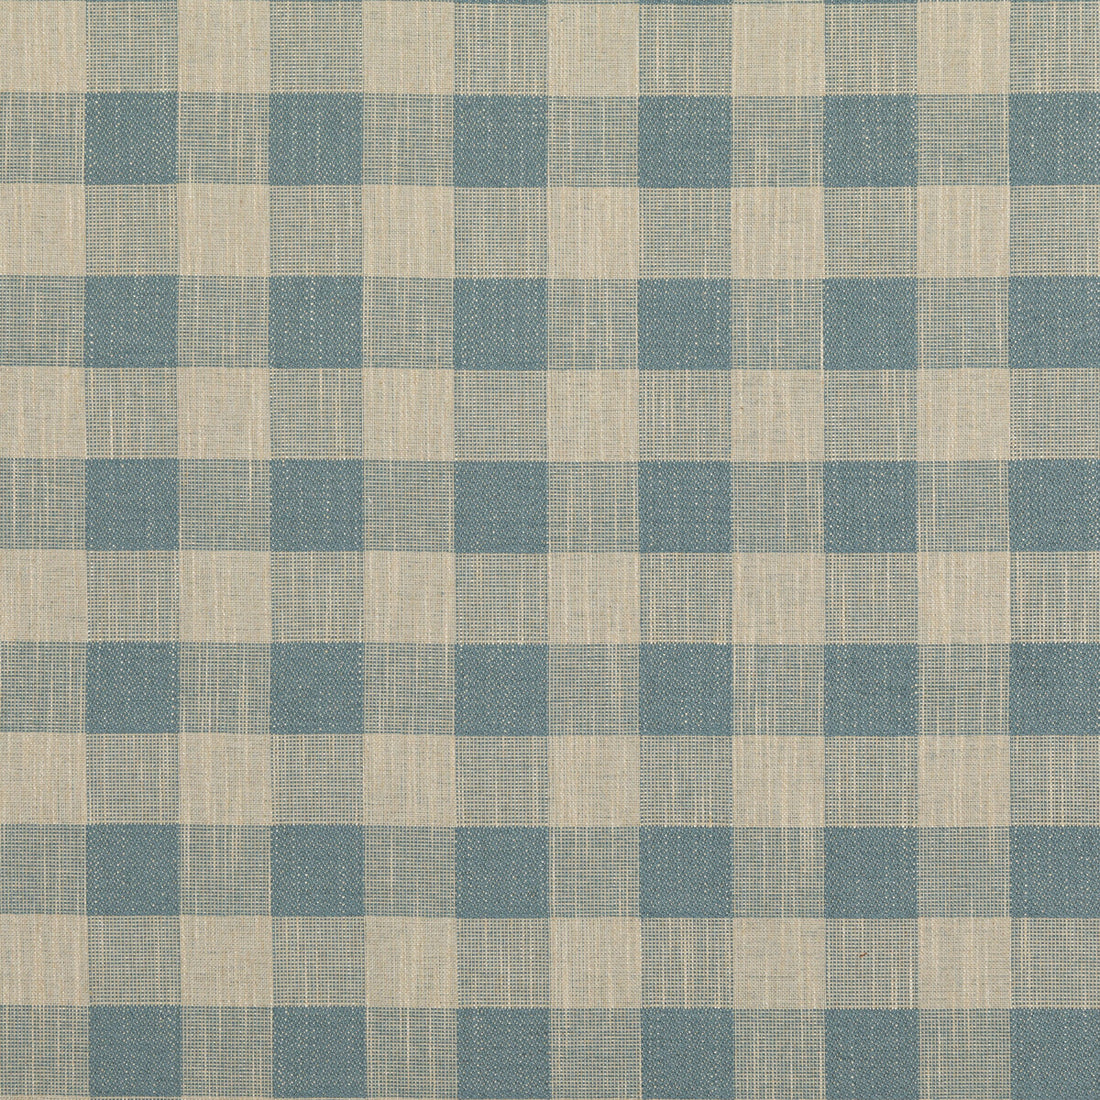 Block Check fabric in soft blue color - pattern PF50490.605.0 - by Baker Lifestyle in the Block Weaves collection